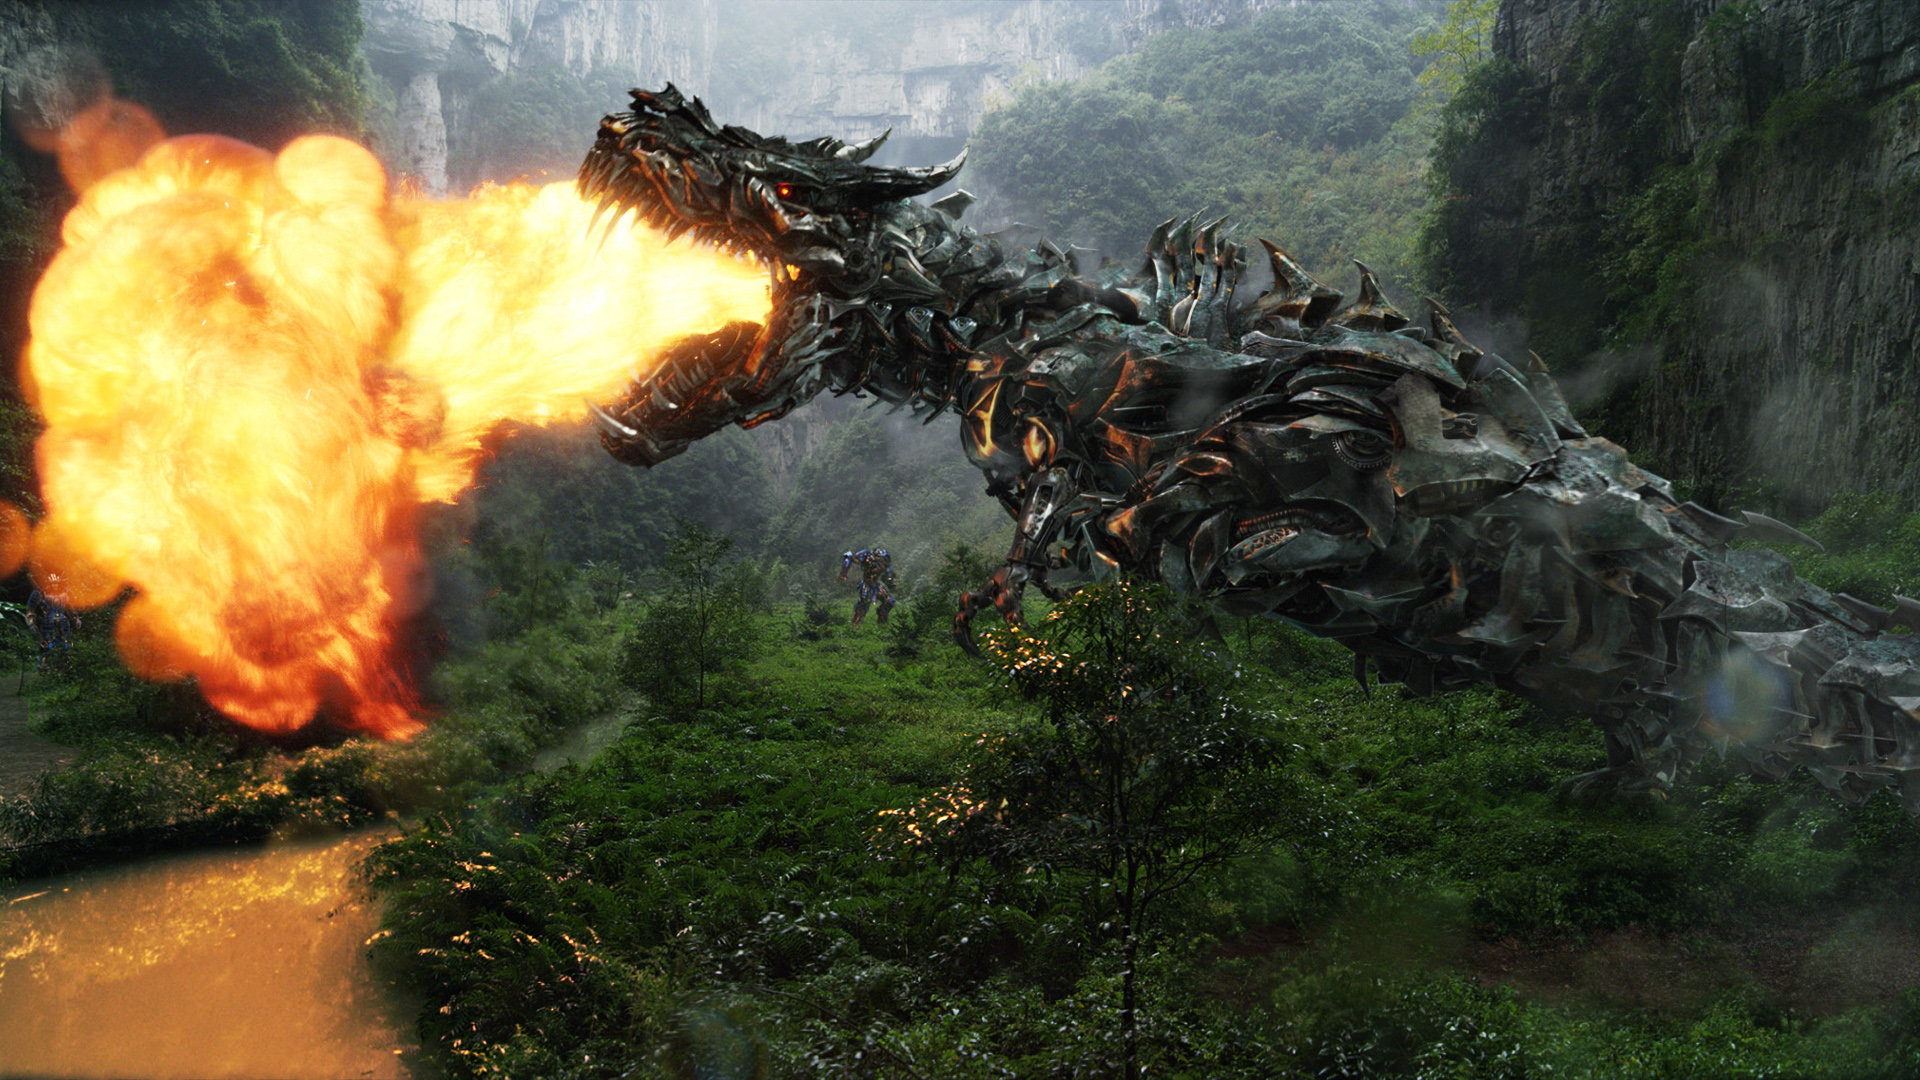 transformers age of extinction 1080p